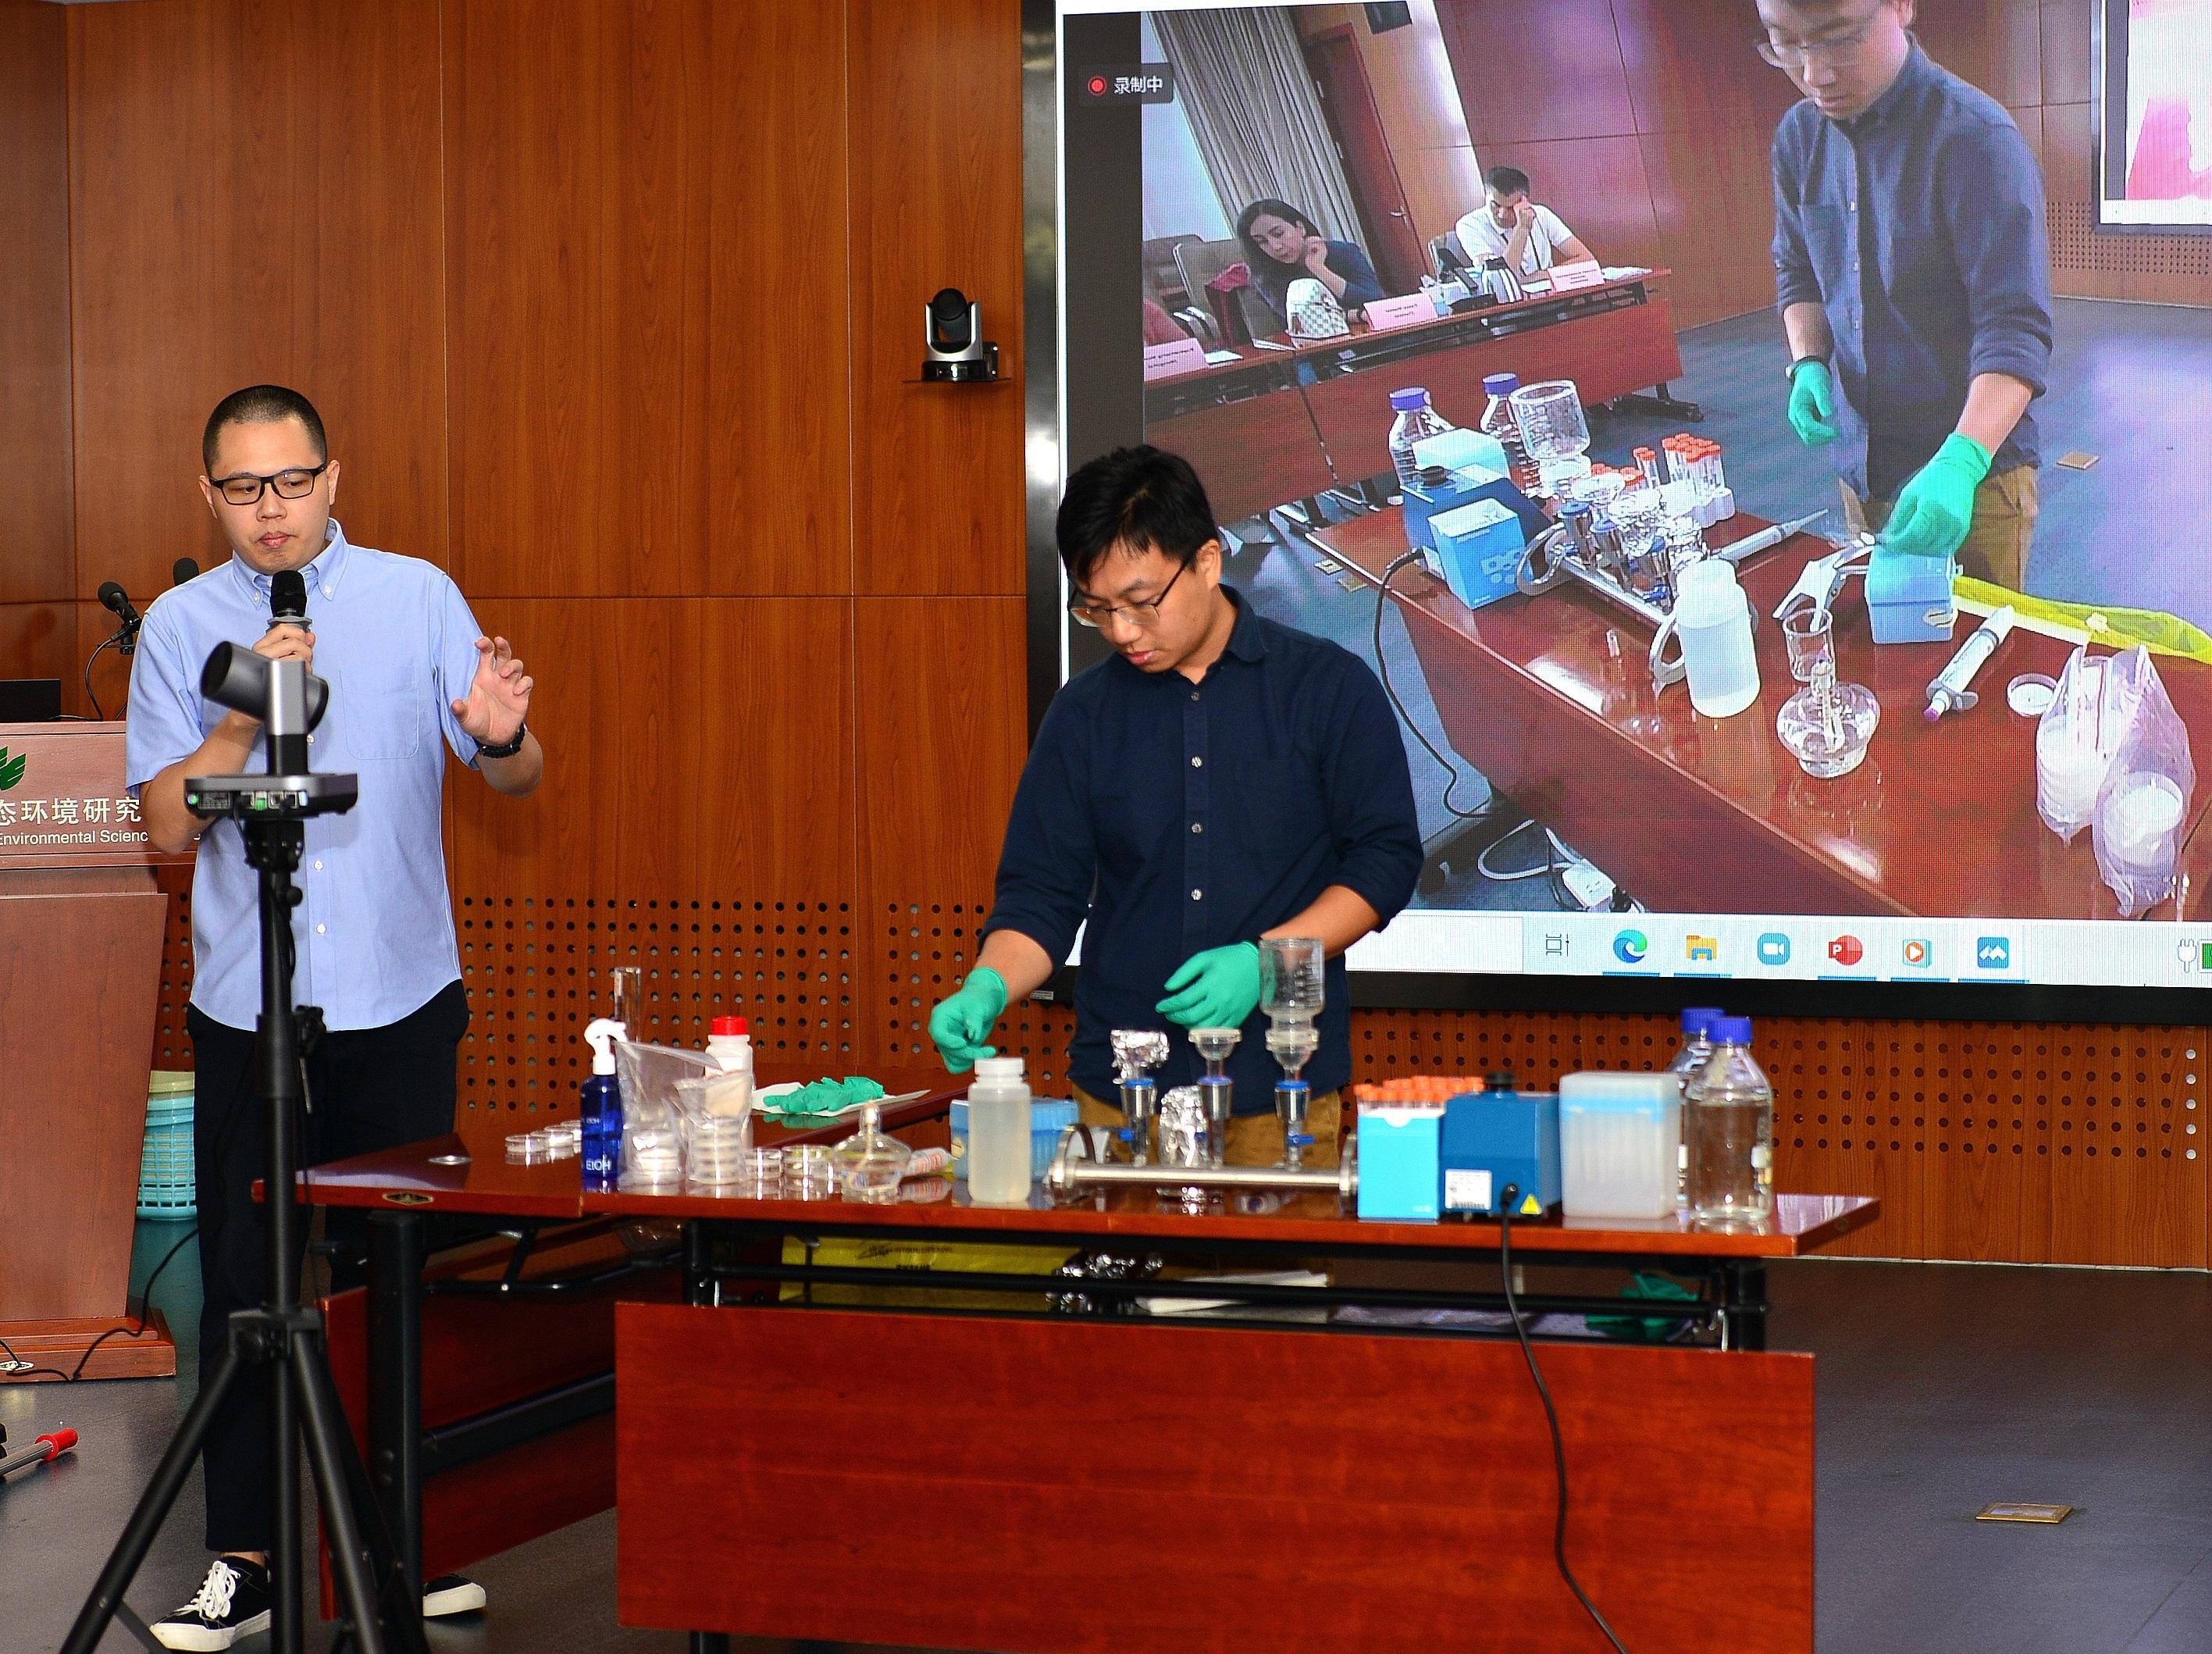 The Director of Environmental Protection, Dr Samuel Chui, today (September 7) attended the International Symposium on Environmental Microbes of Health Concern held under the Belt and Road Initiative in Beijing and visited the Ministry of Ecology and Environment. Photo shows Environmental Protection Department staff who joined the delegation providing demonstration and training on the collection, pre-treatment and analysis of water samples at the symposium.